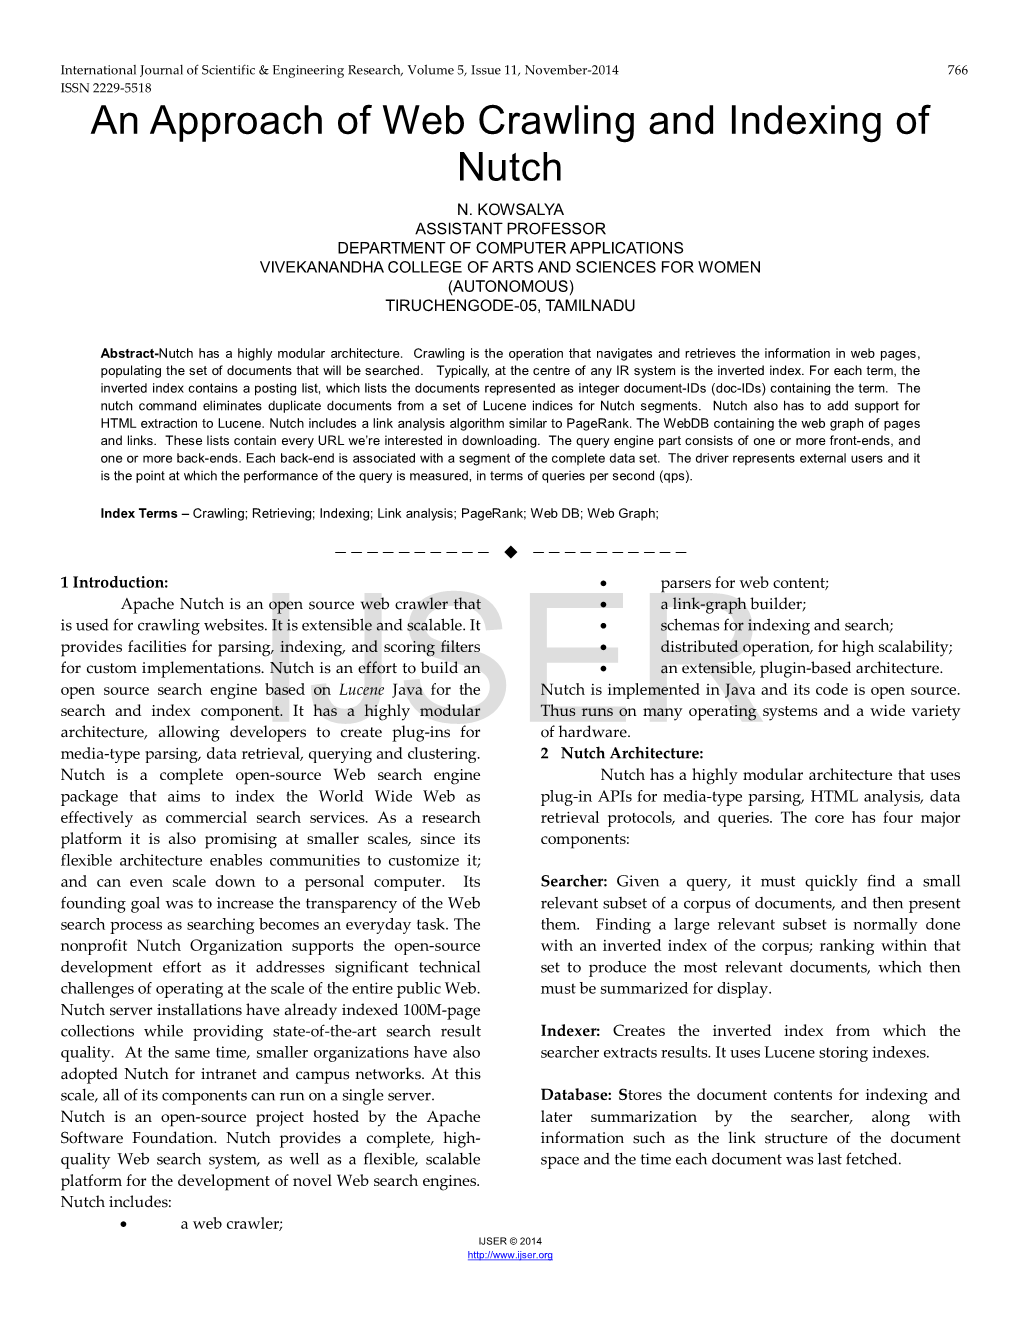 An Approach of Web Crawling and Indexing of Nutch N